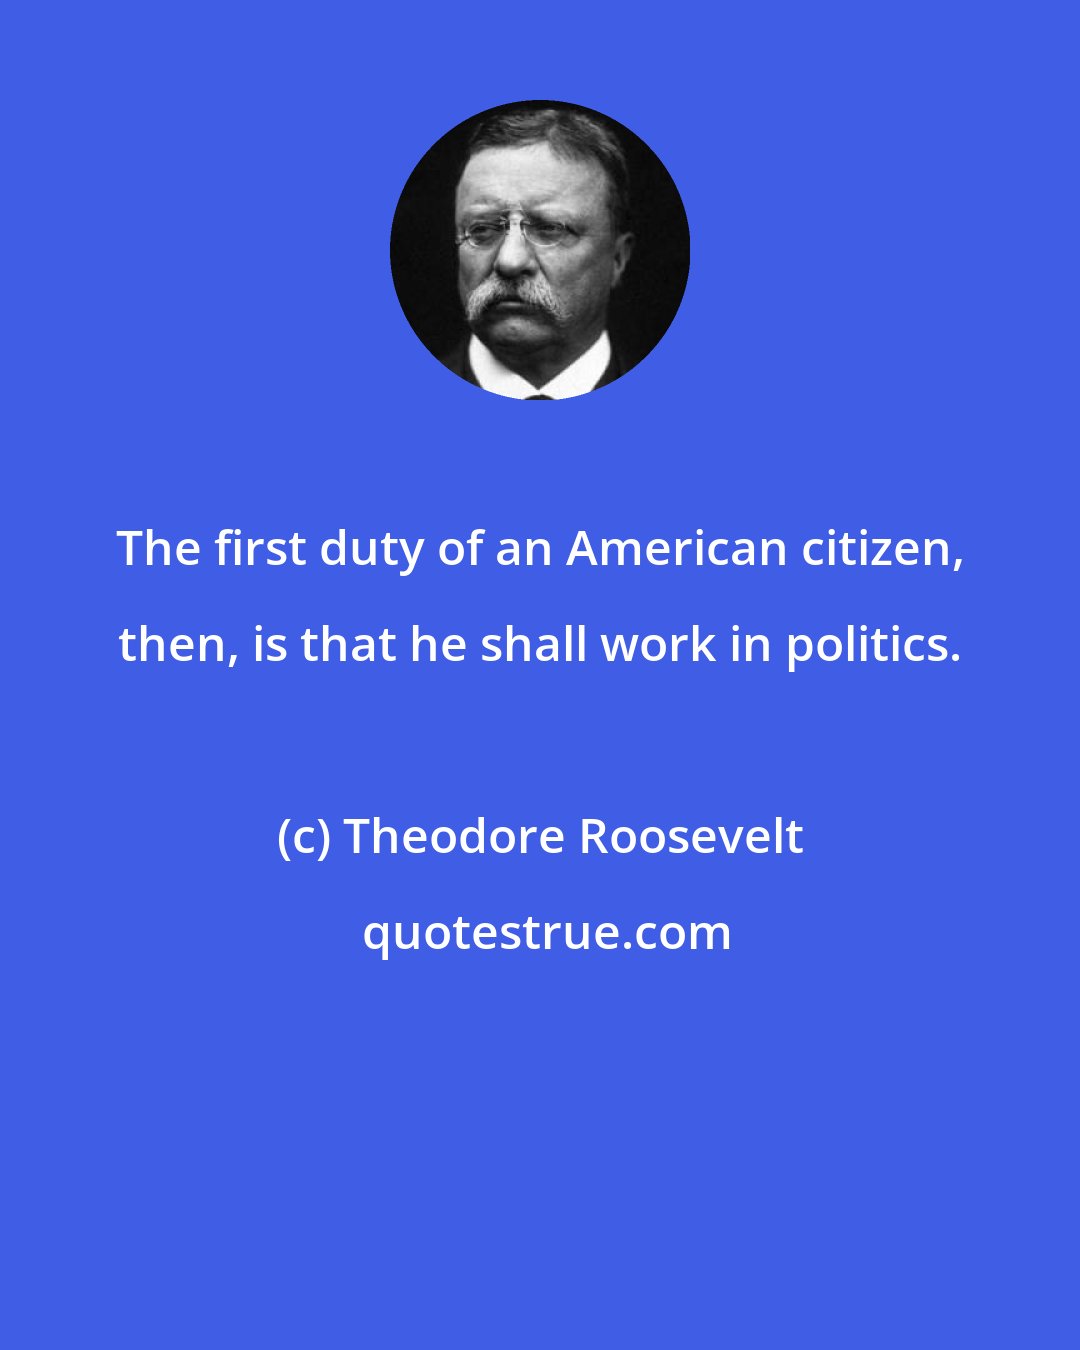 Theodore Roosevelt: The first duty of an American citizen, then, is that he shall work in politics.